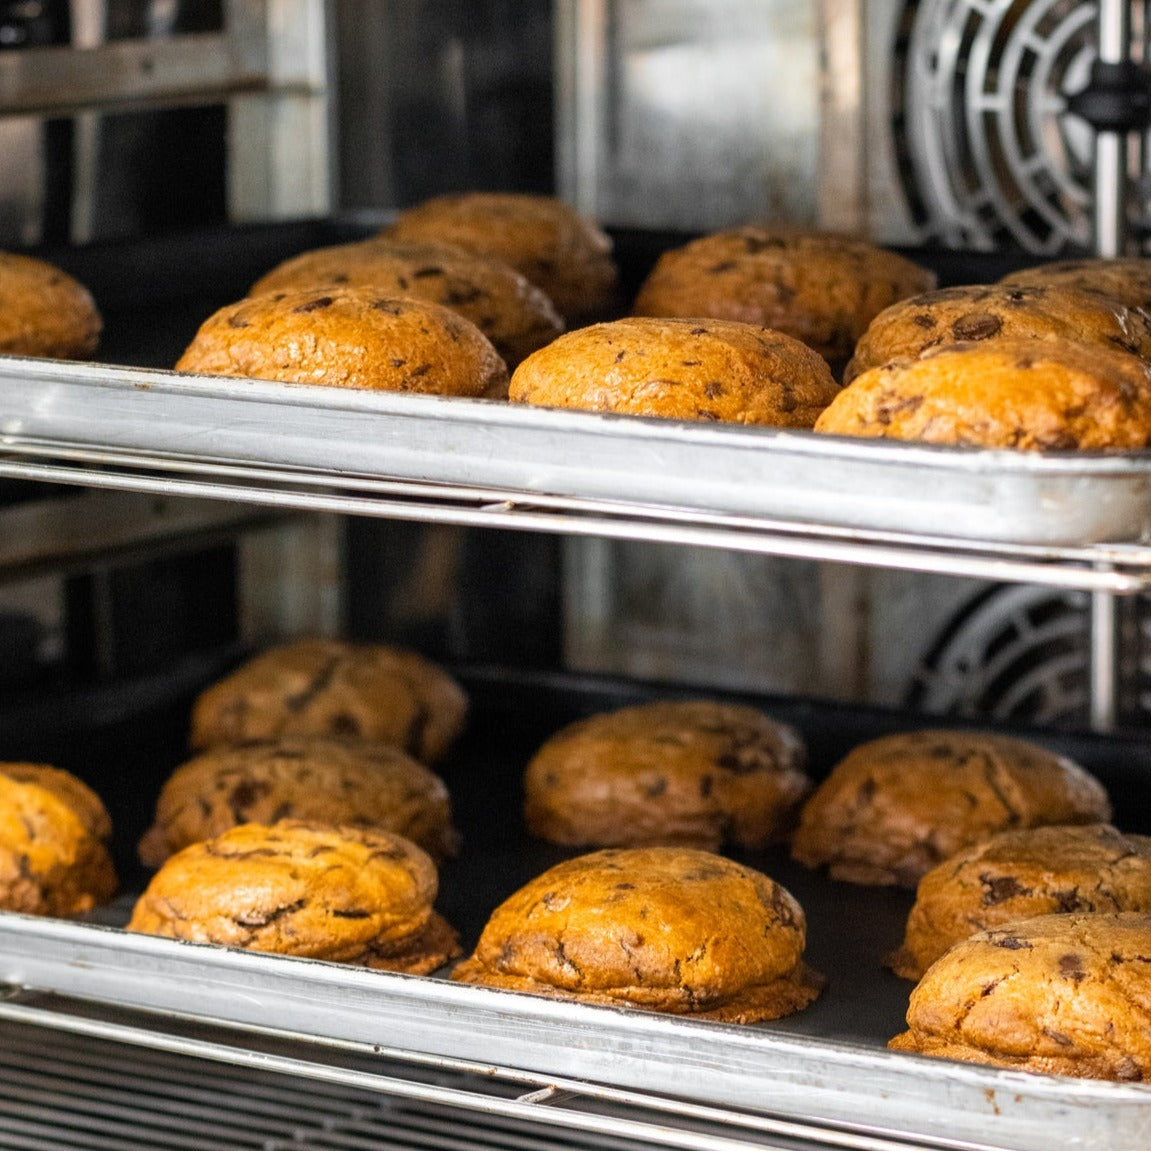 Banksia Bakehouse Chocolate Chip Cookies | Cater Catering Menu